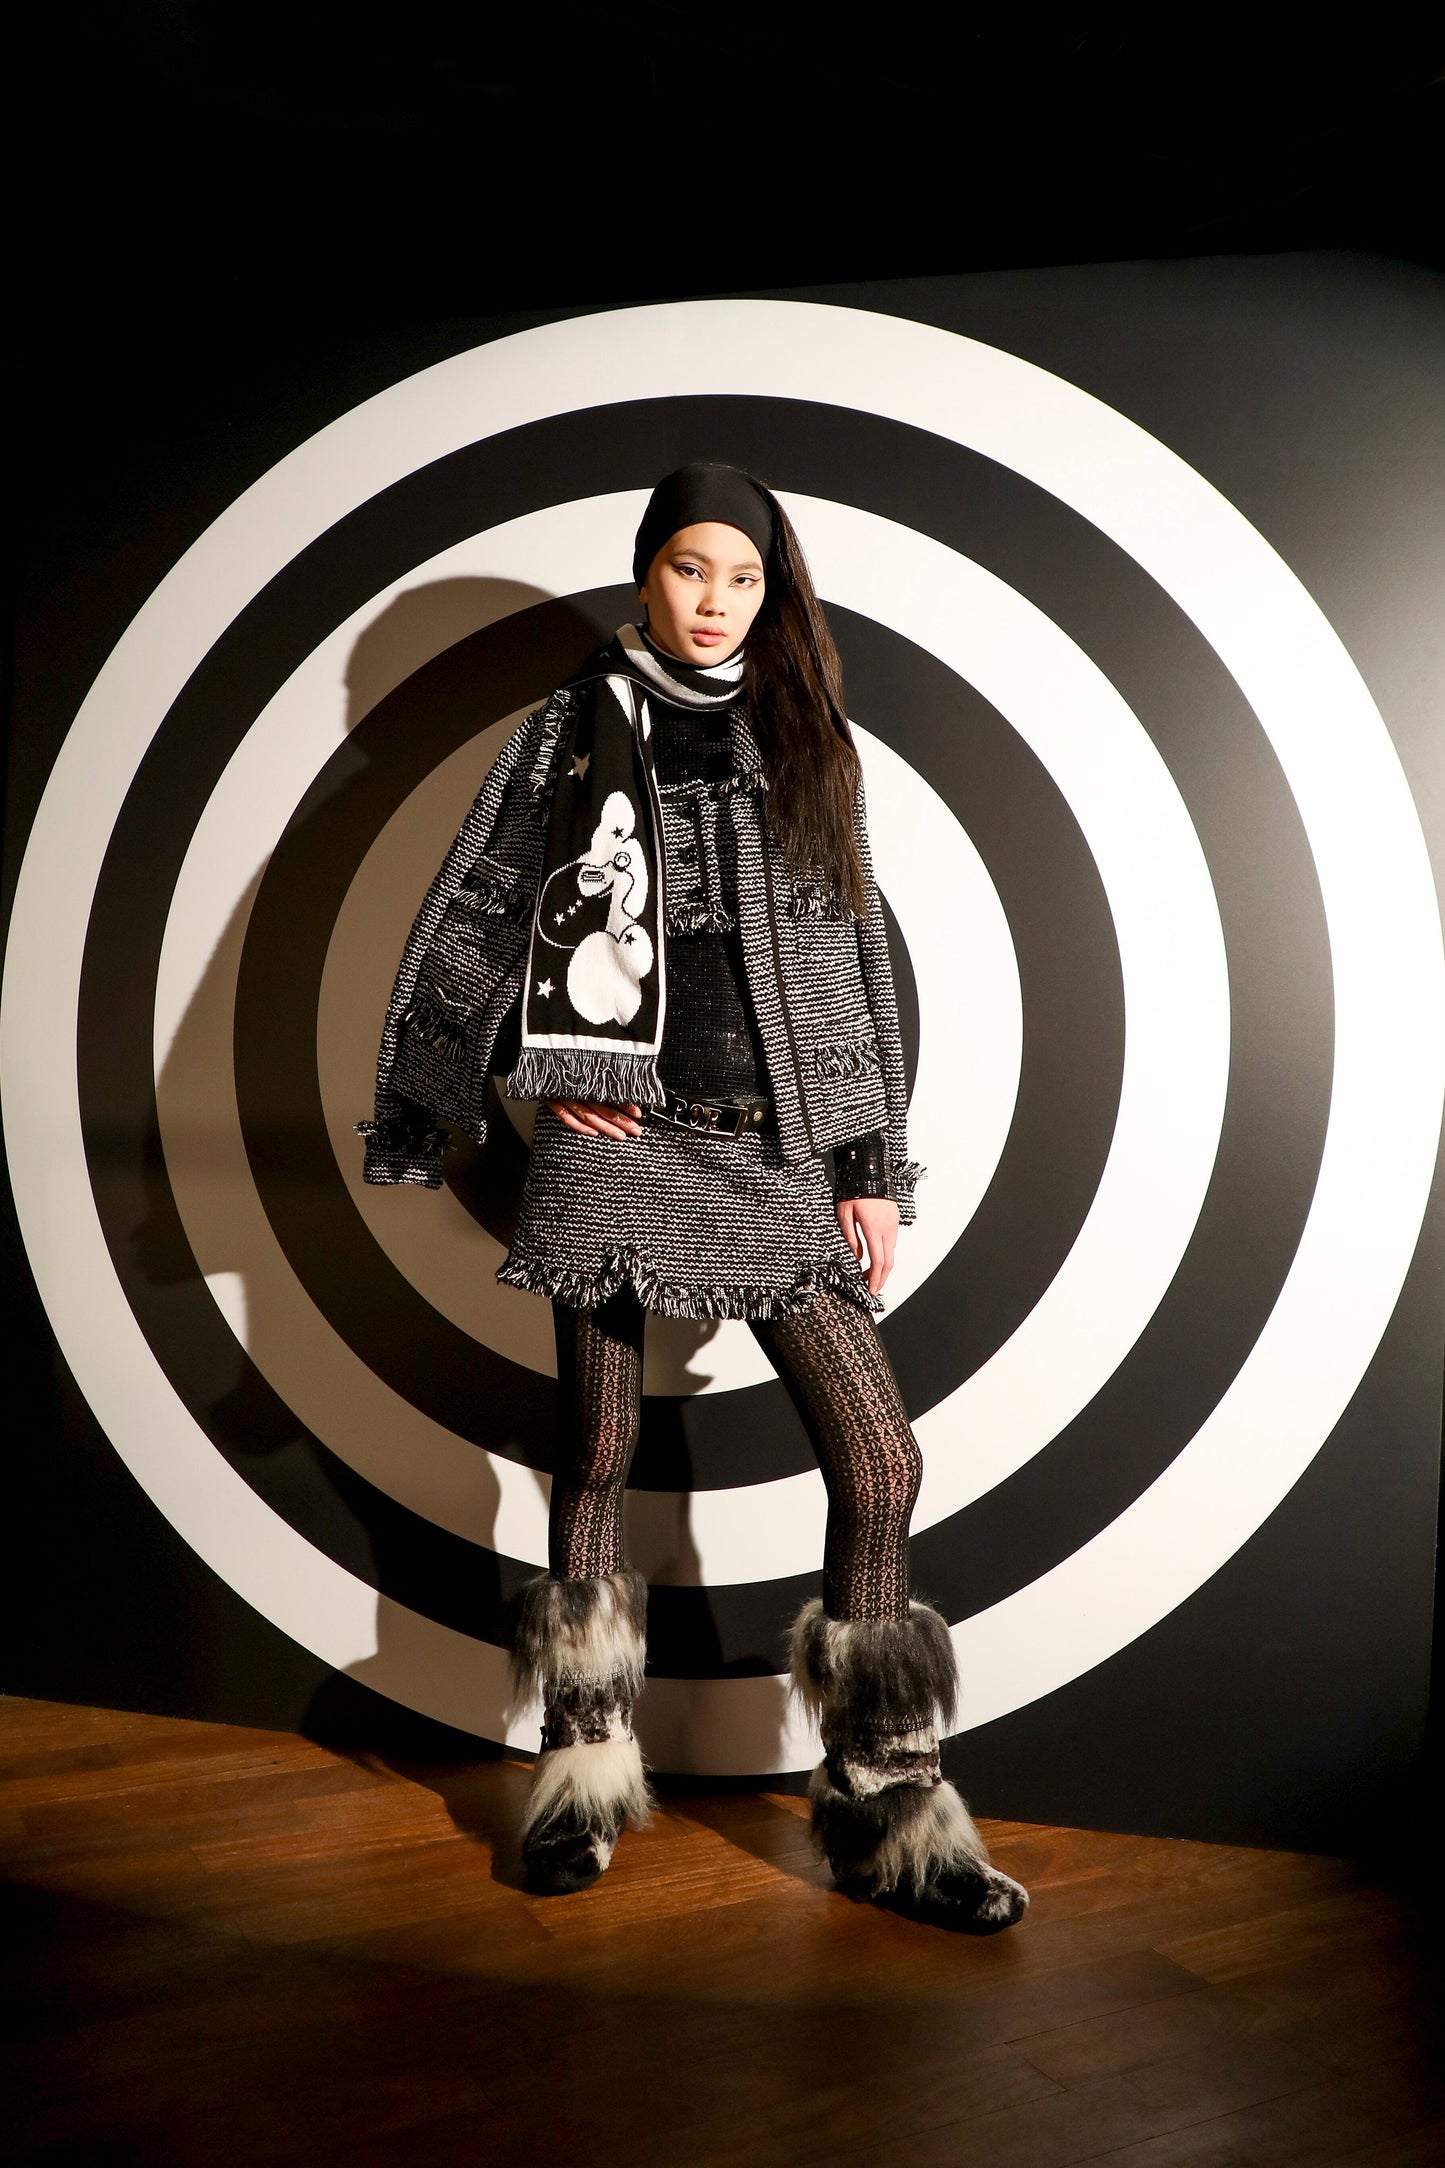 With runway lights, Folklore furry Boot, black and grey, high sole, black lace to tied, long flurry top